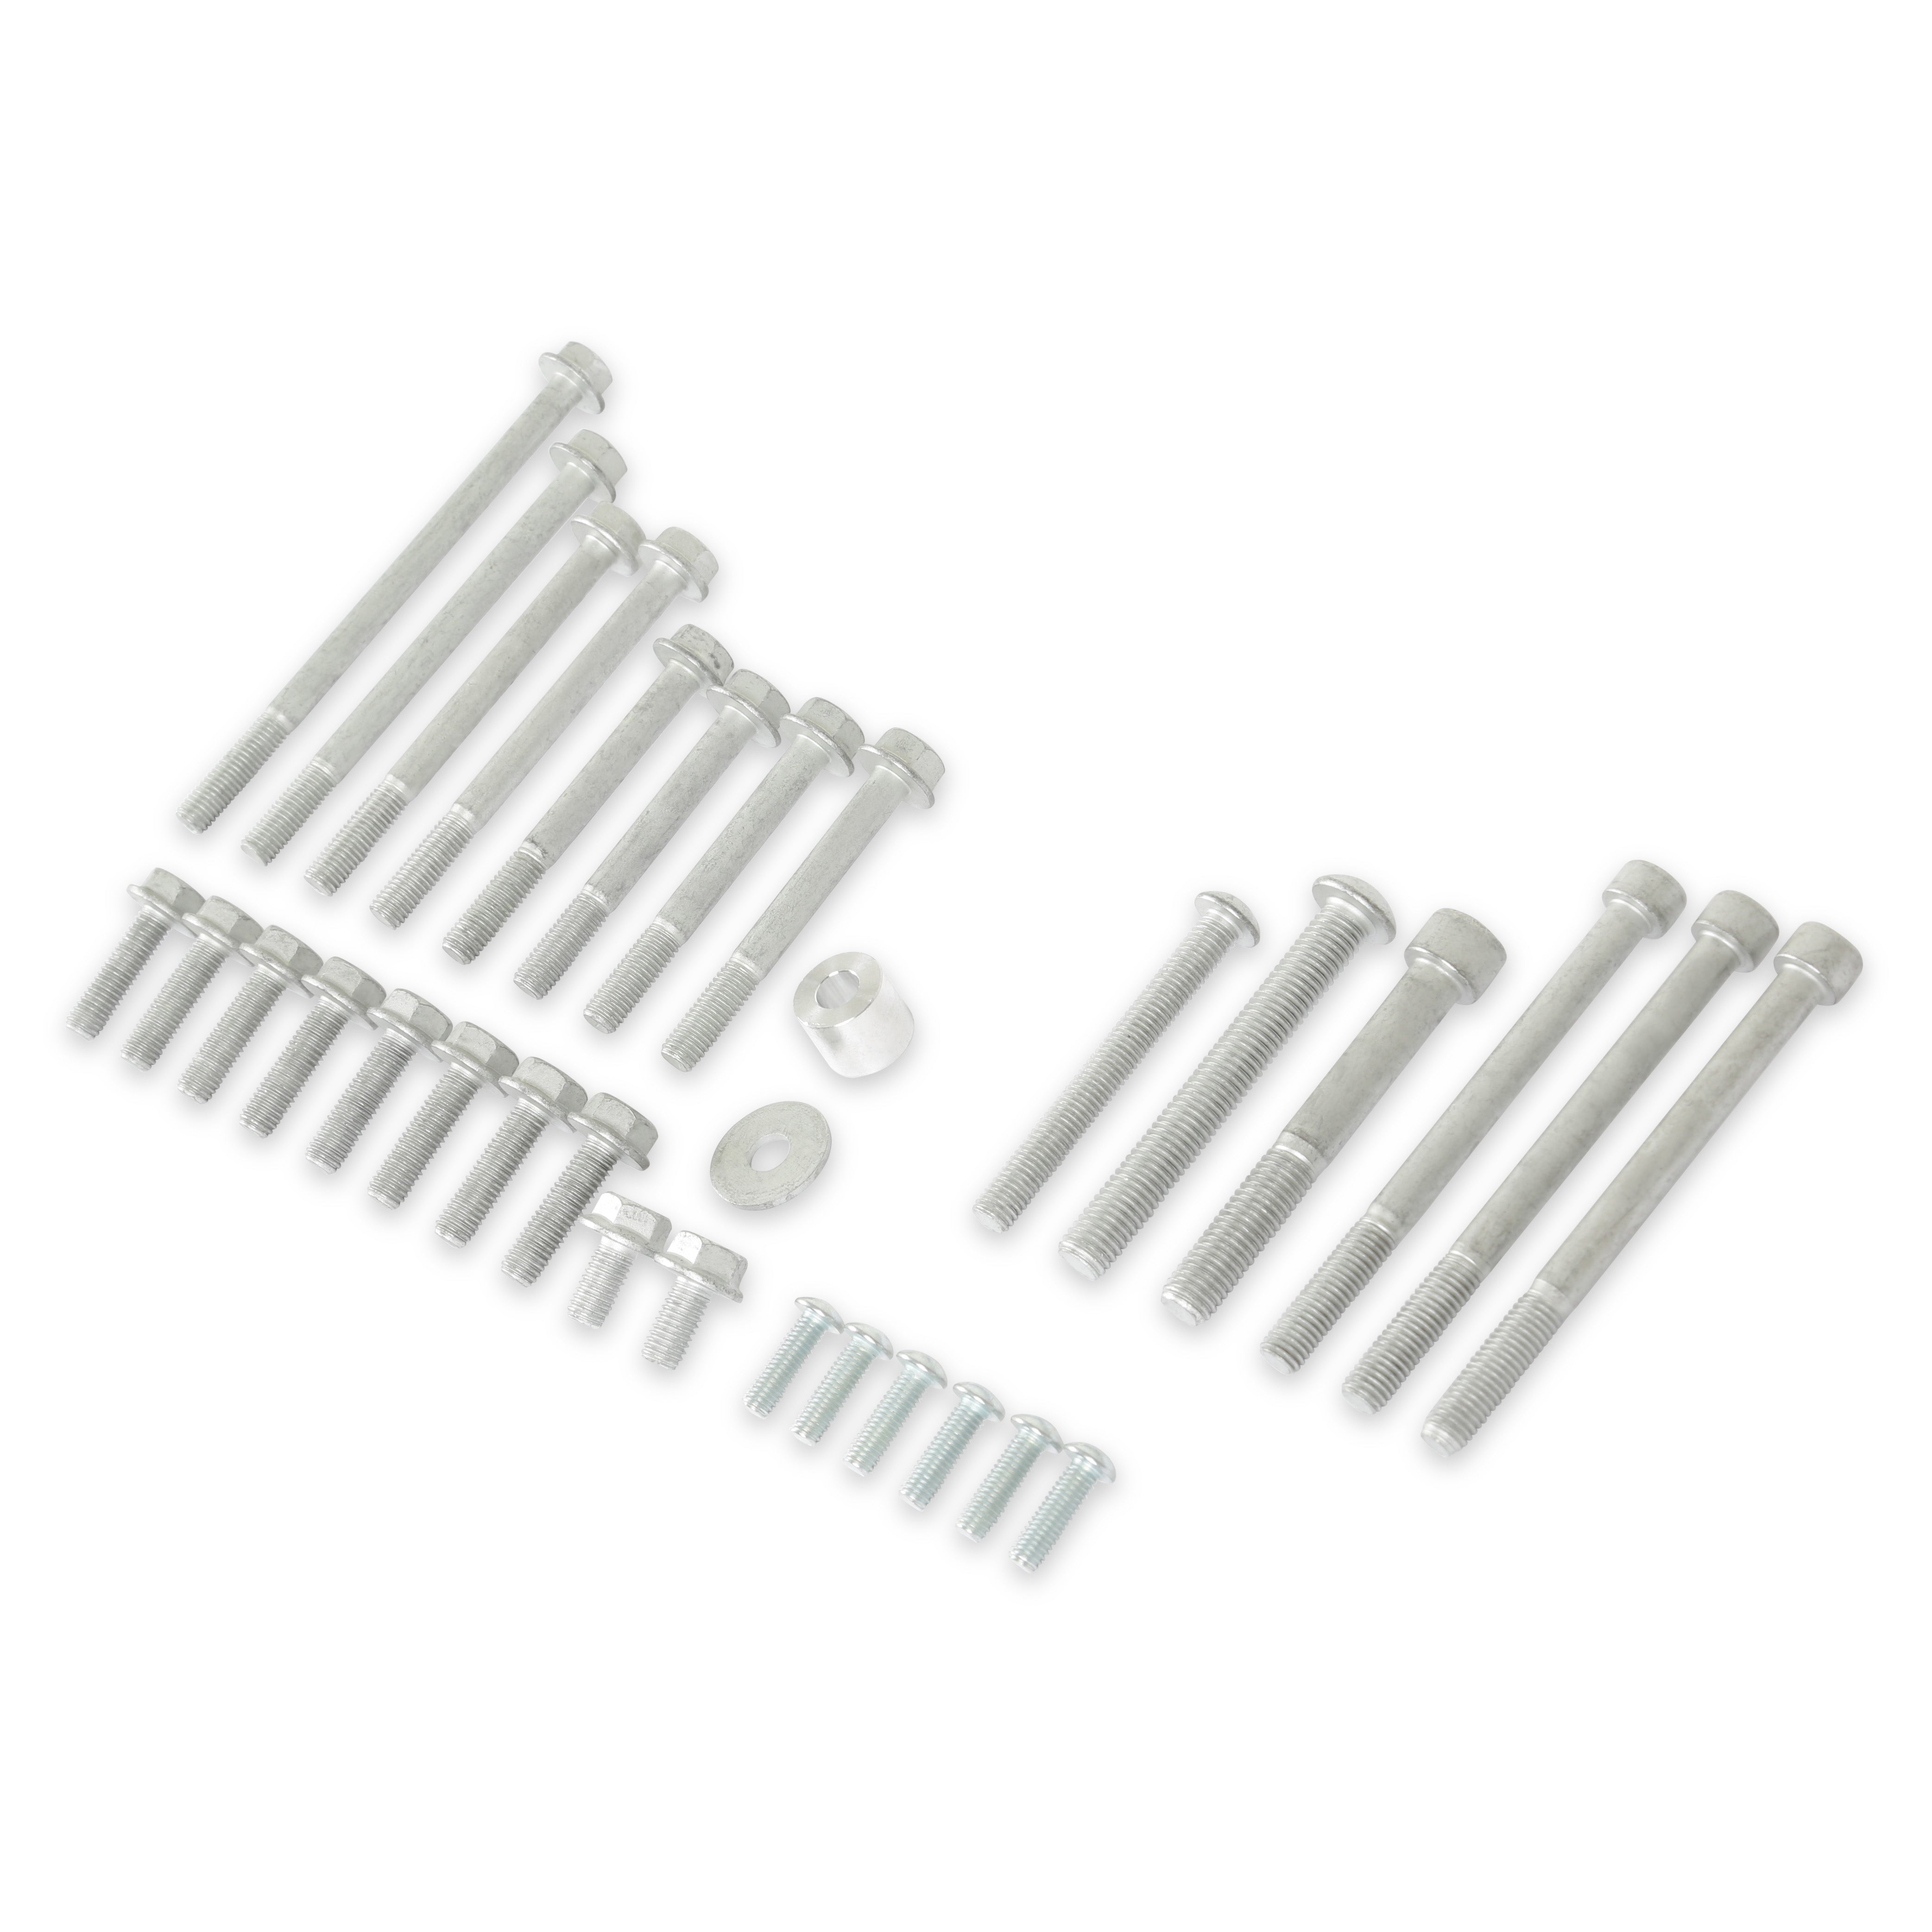 Holley Accessory Drive Component Mount Set 97-366